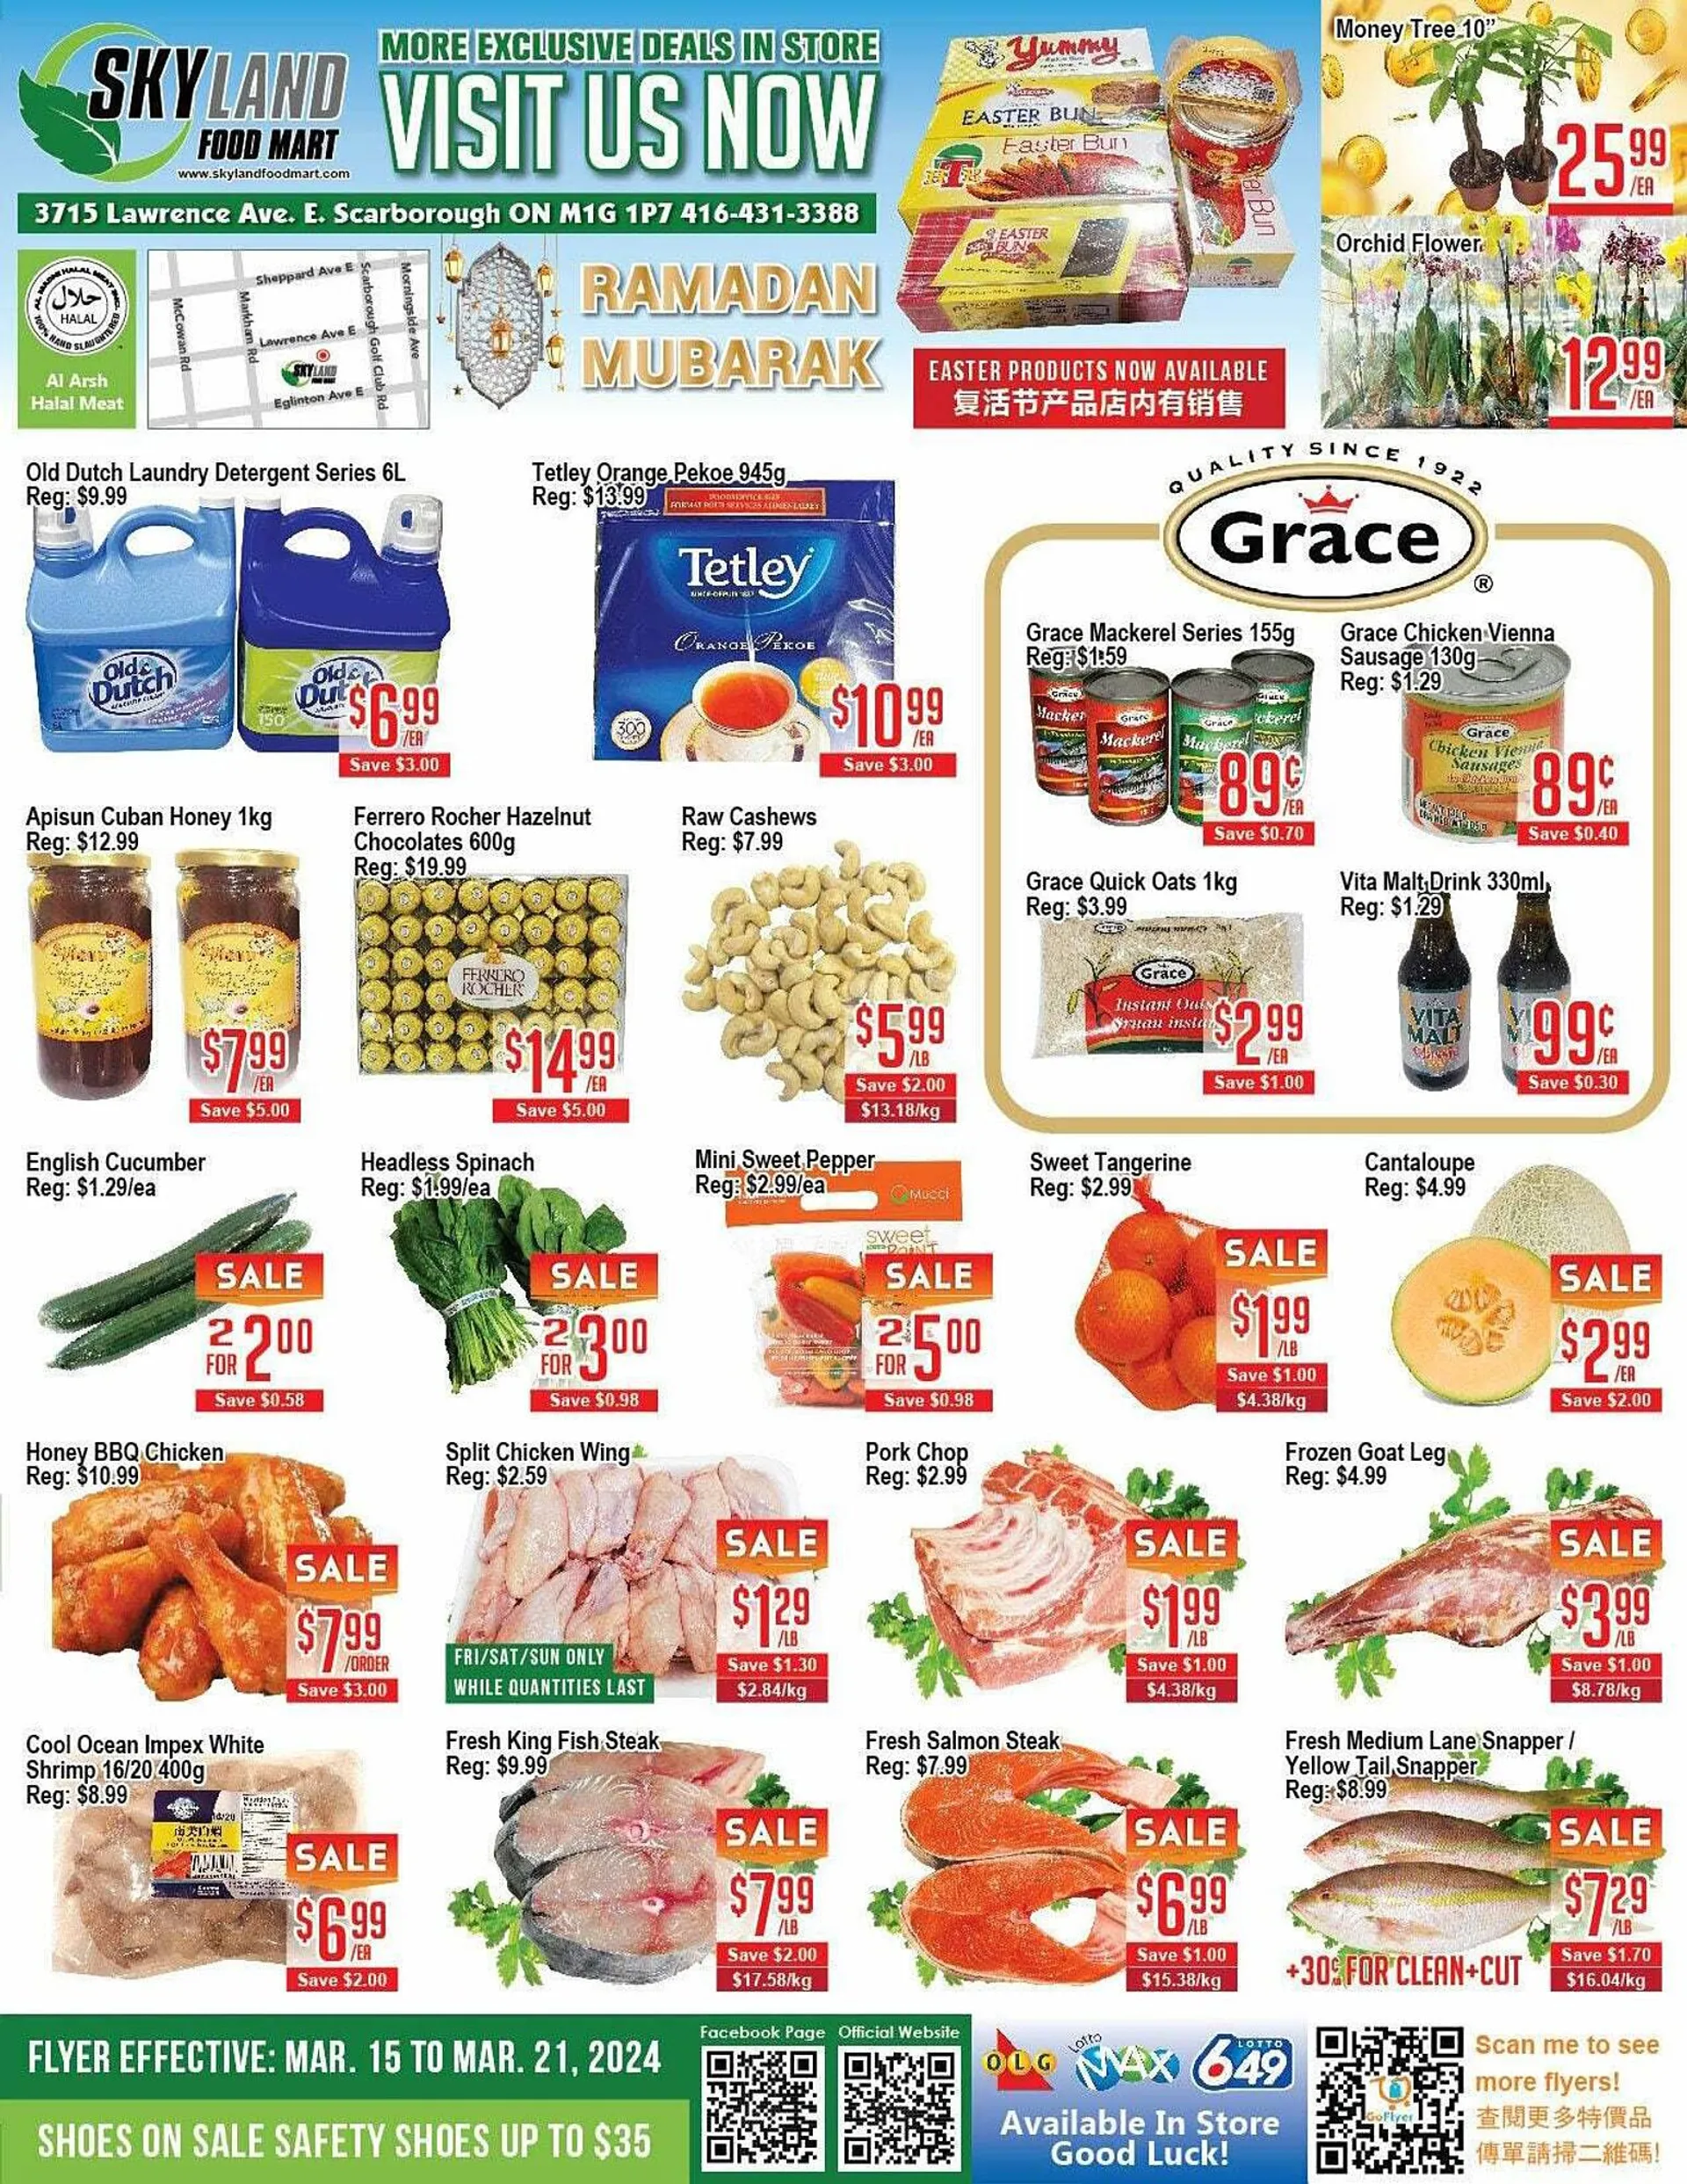 Skyland Foodmart flyer from March 15 to March 22 2024 - flyer page 